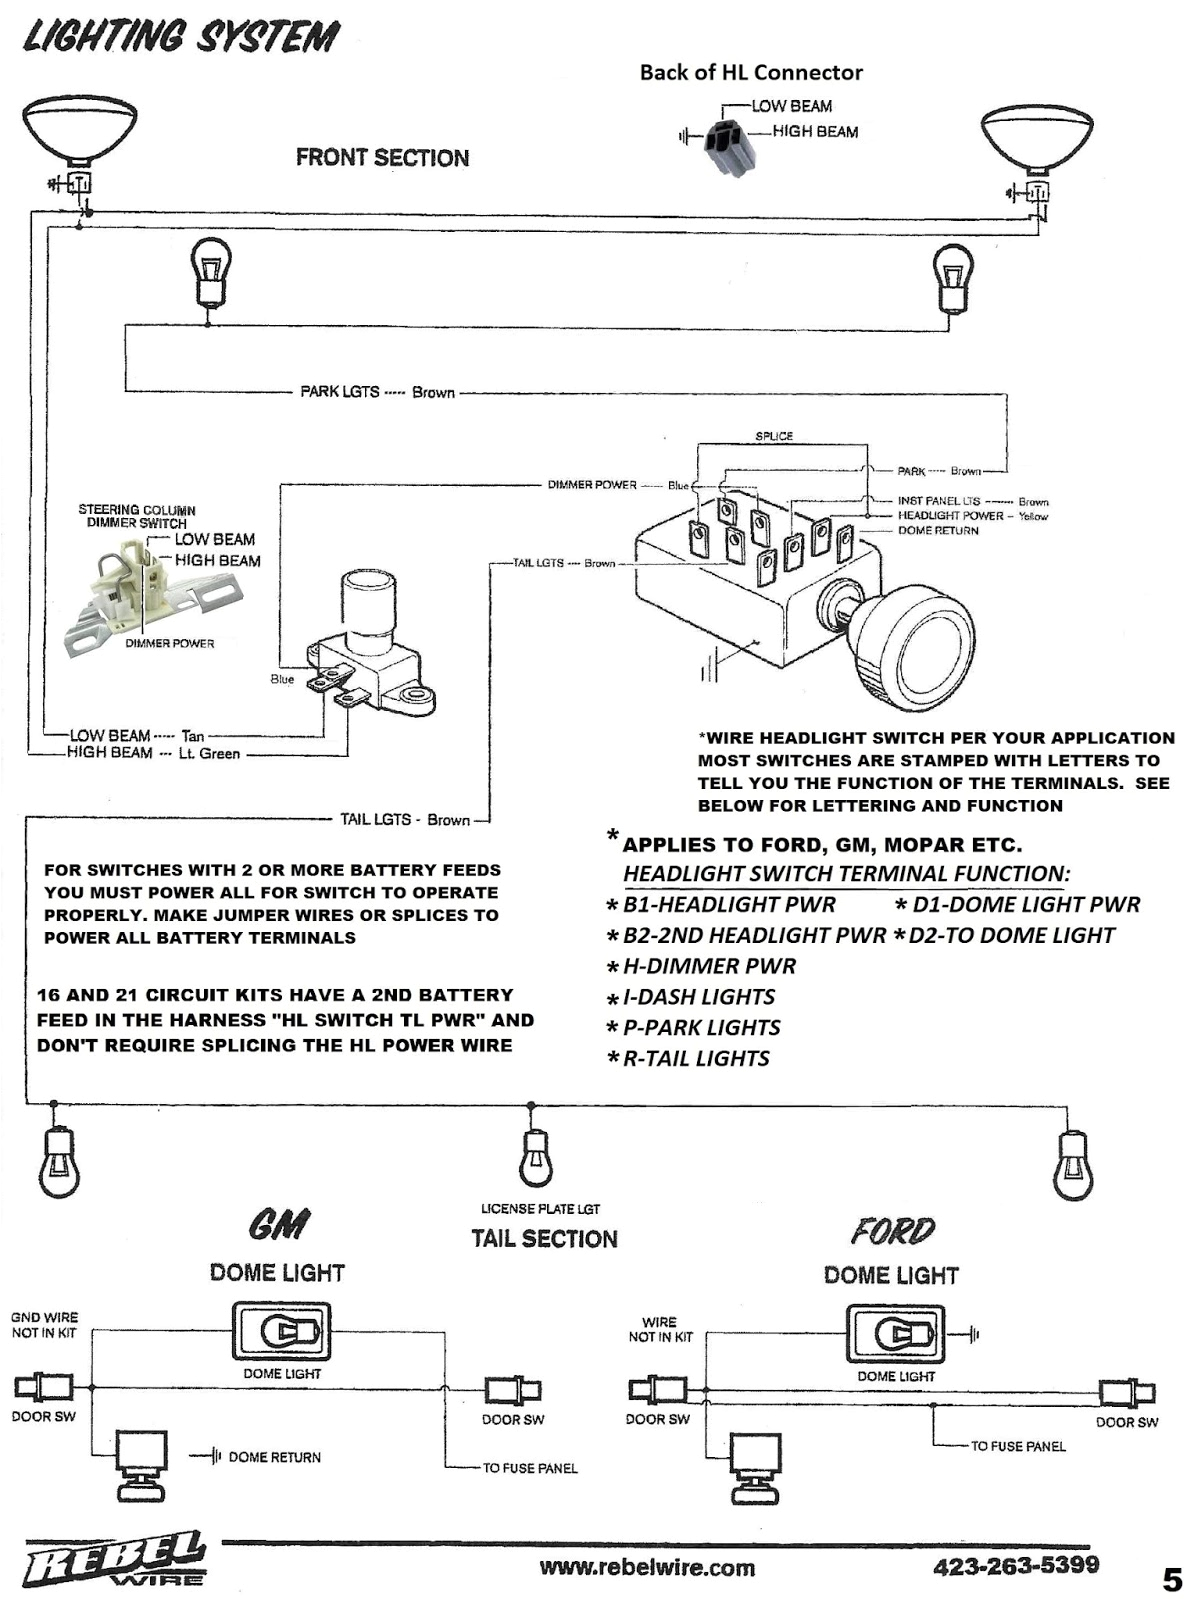 dome light wiring harness wiring diagram blog ez dome light wiring harness diagram